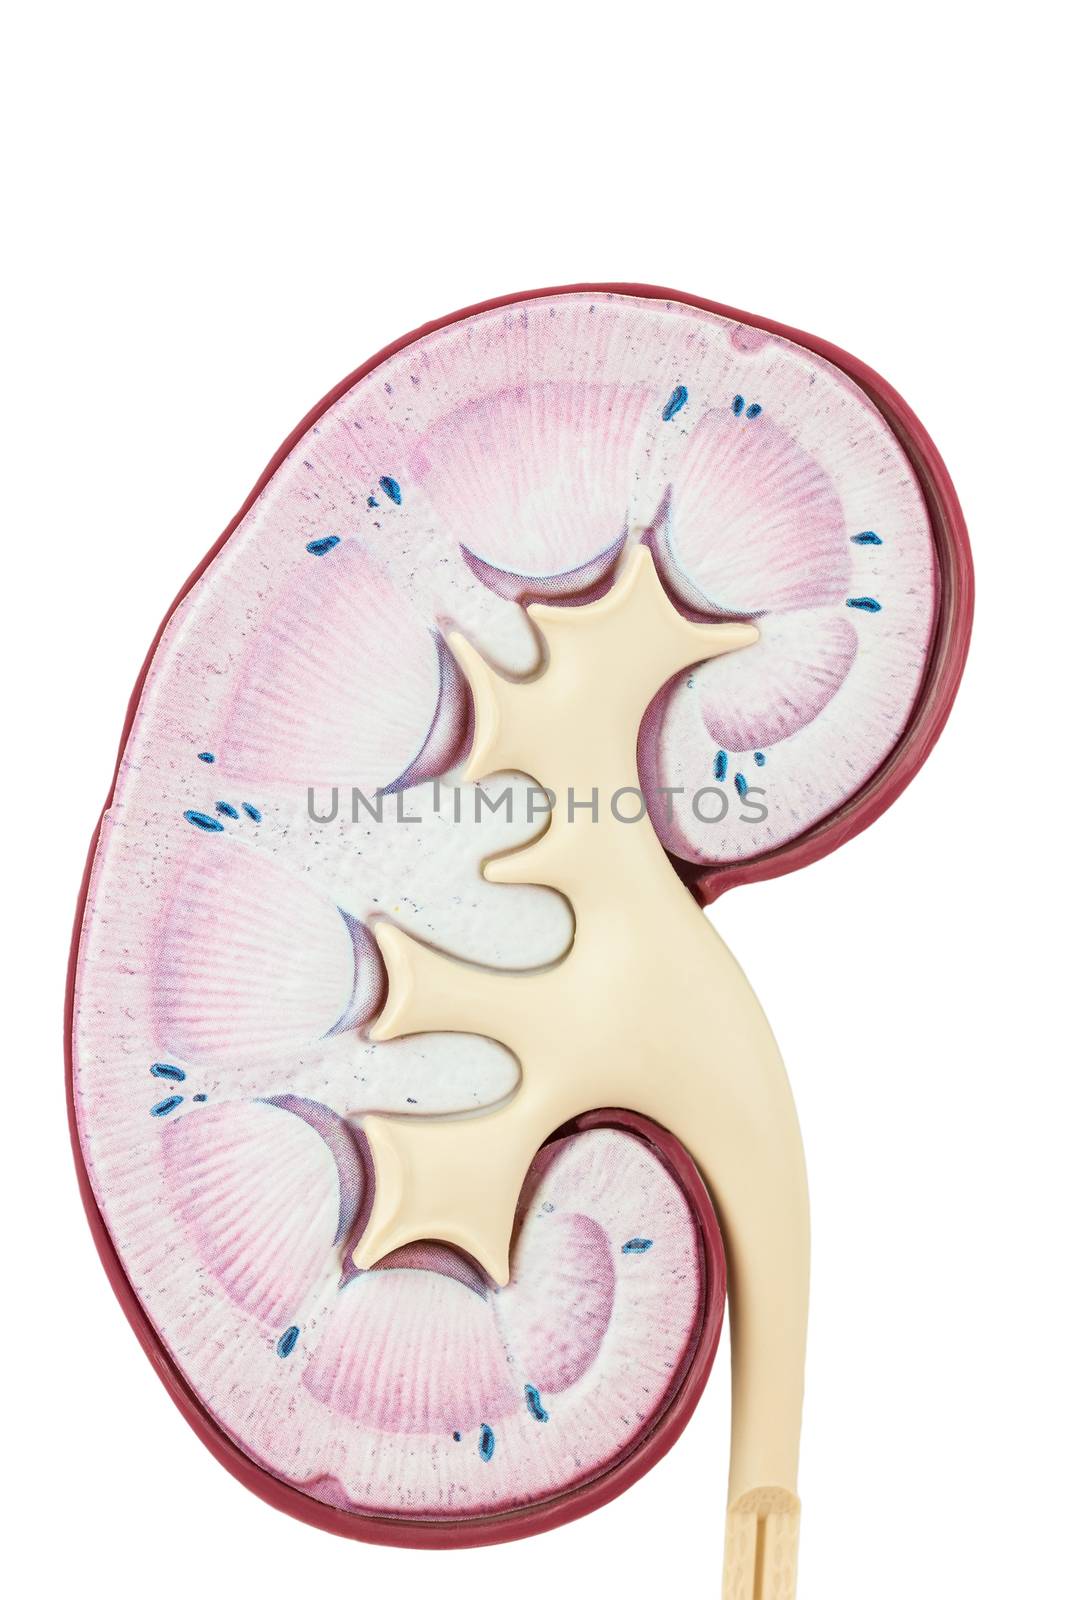 Human kidney isolated on white background by BenSchonewille